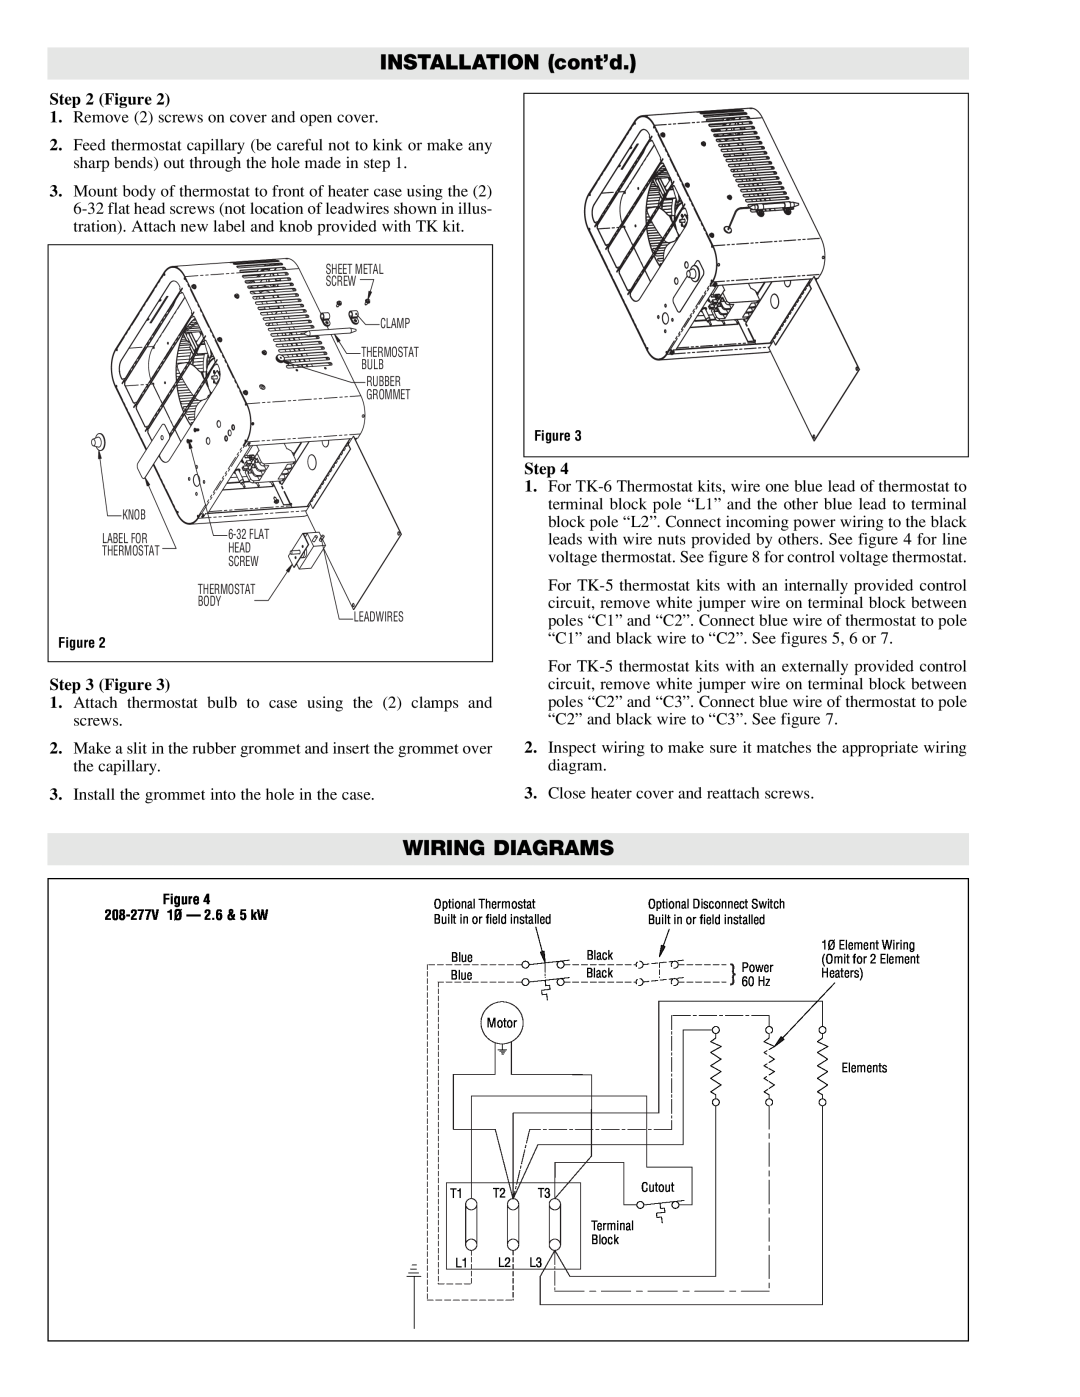 Chromalox HVH-TK6, HVH-TK5 specifications INSTALLATION cont’d, Wiring Diagrams, Figure, Step 